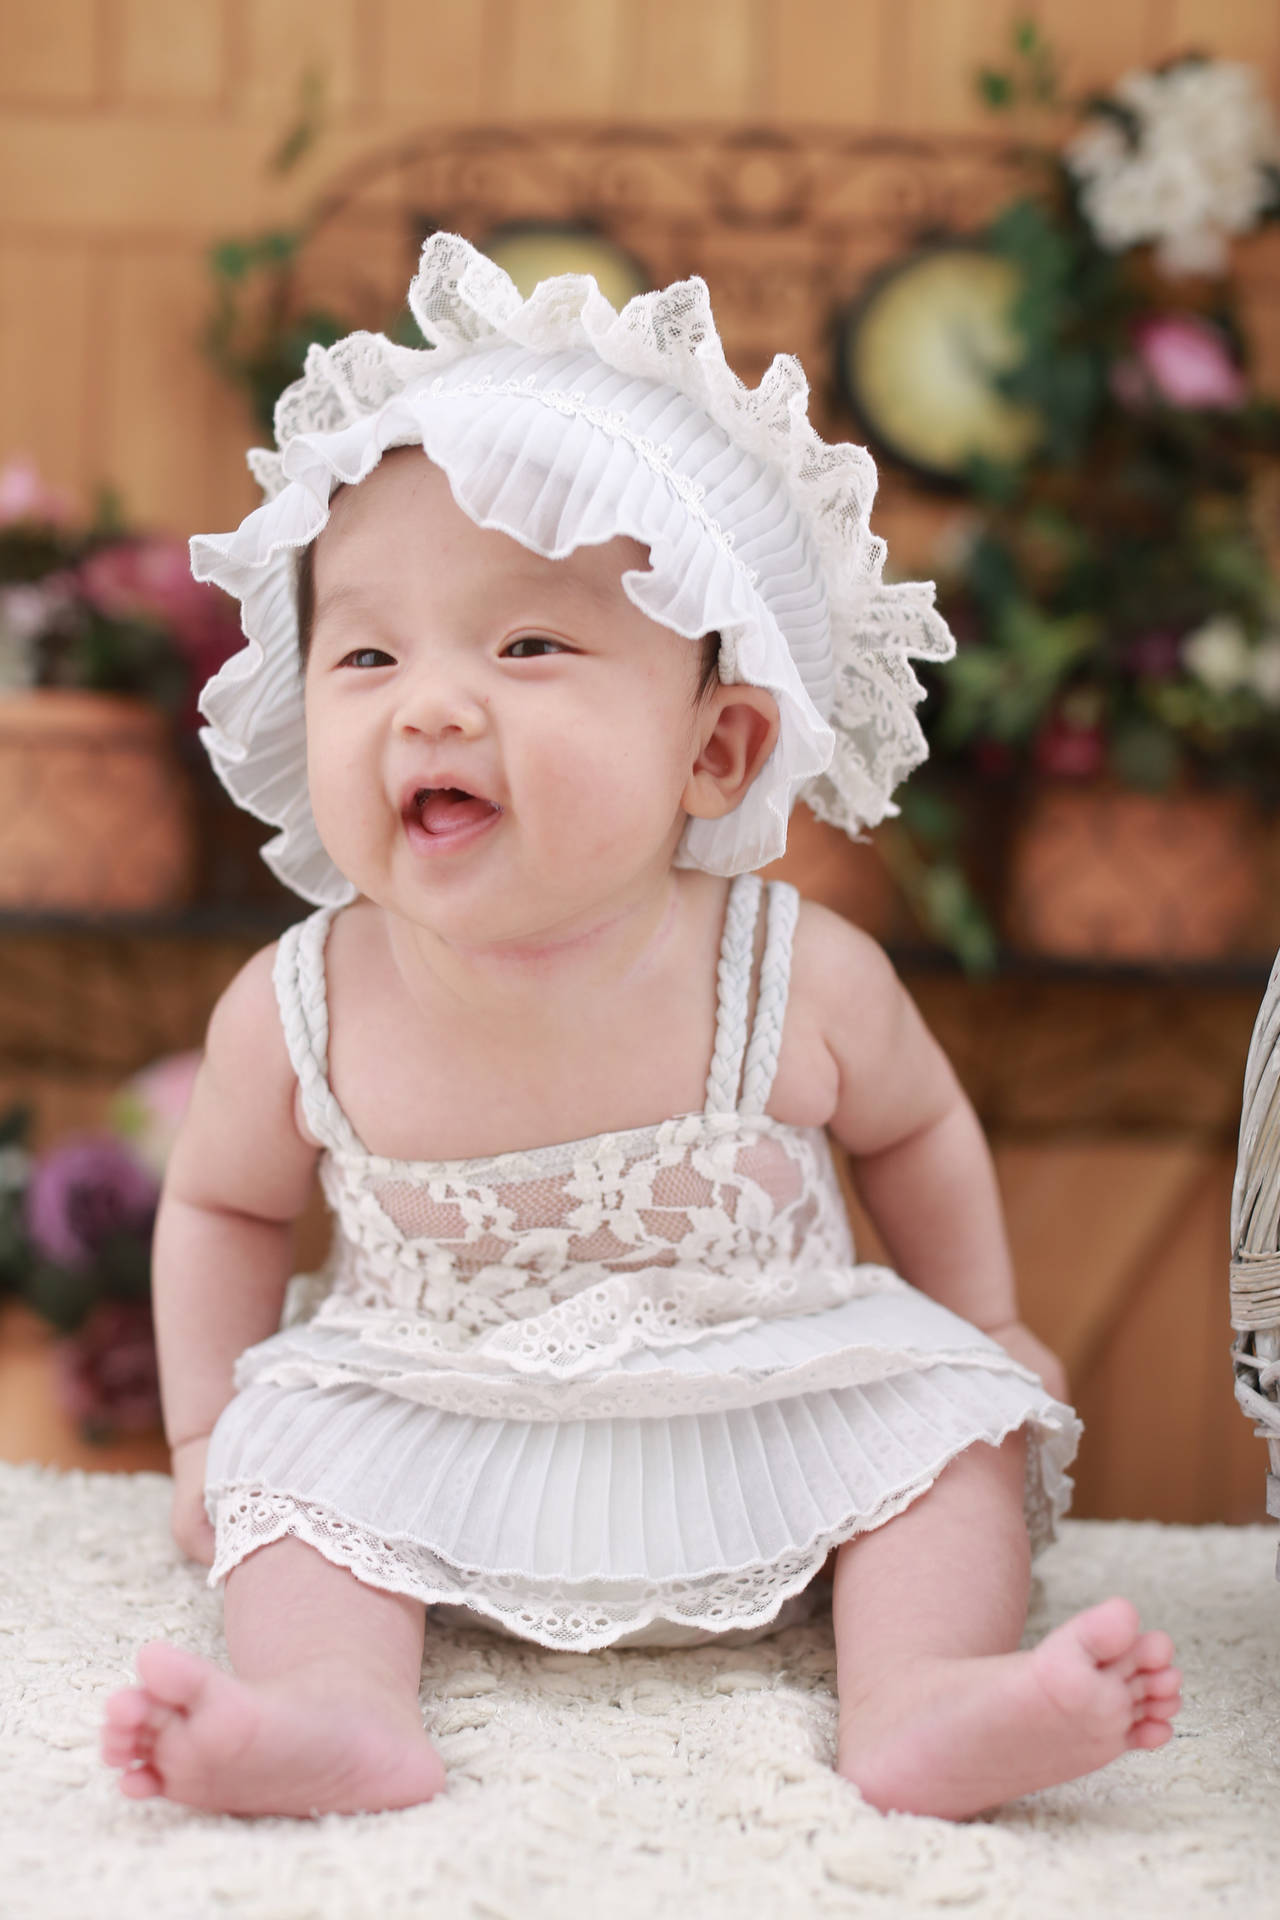 Cute Baby In White Dress And Hairband